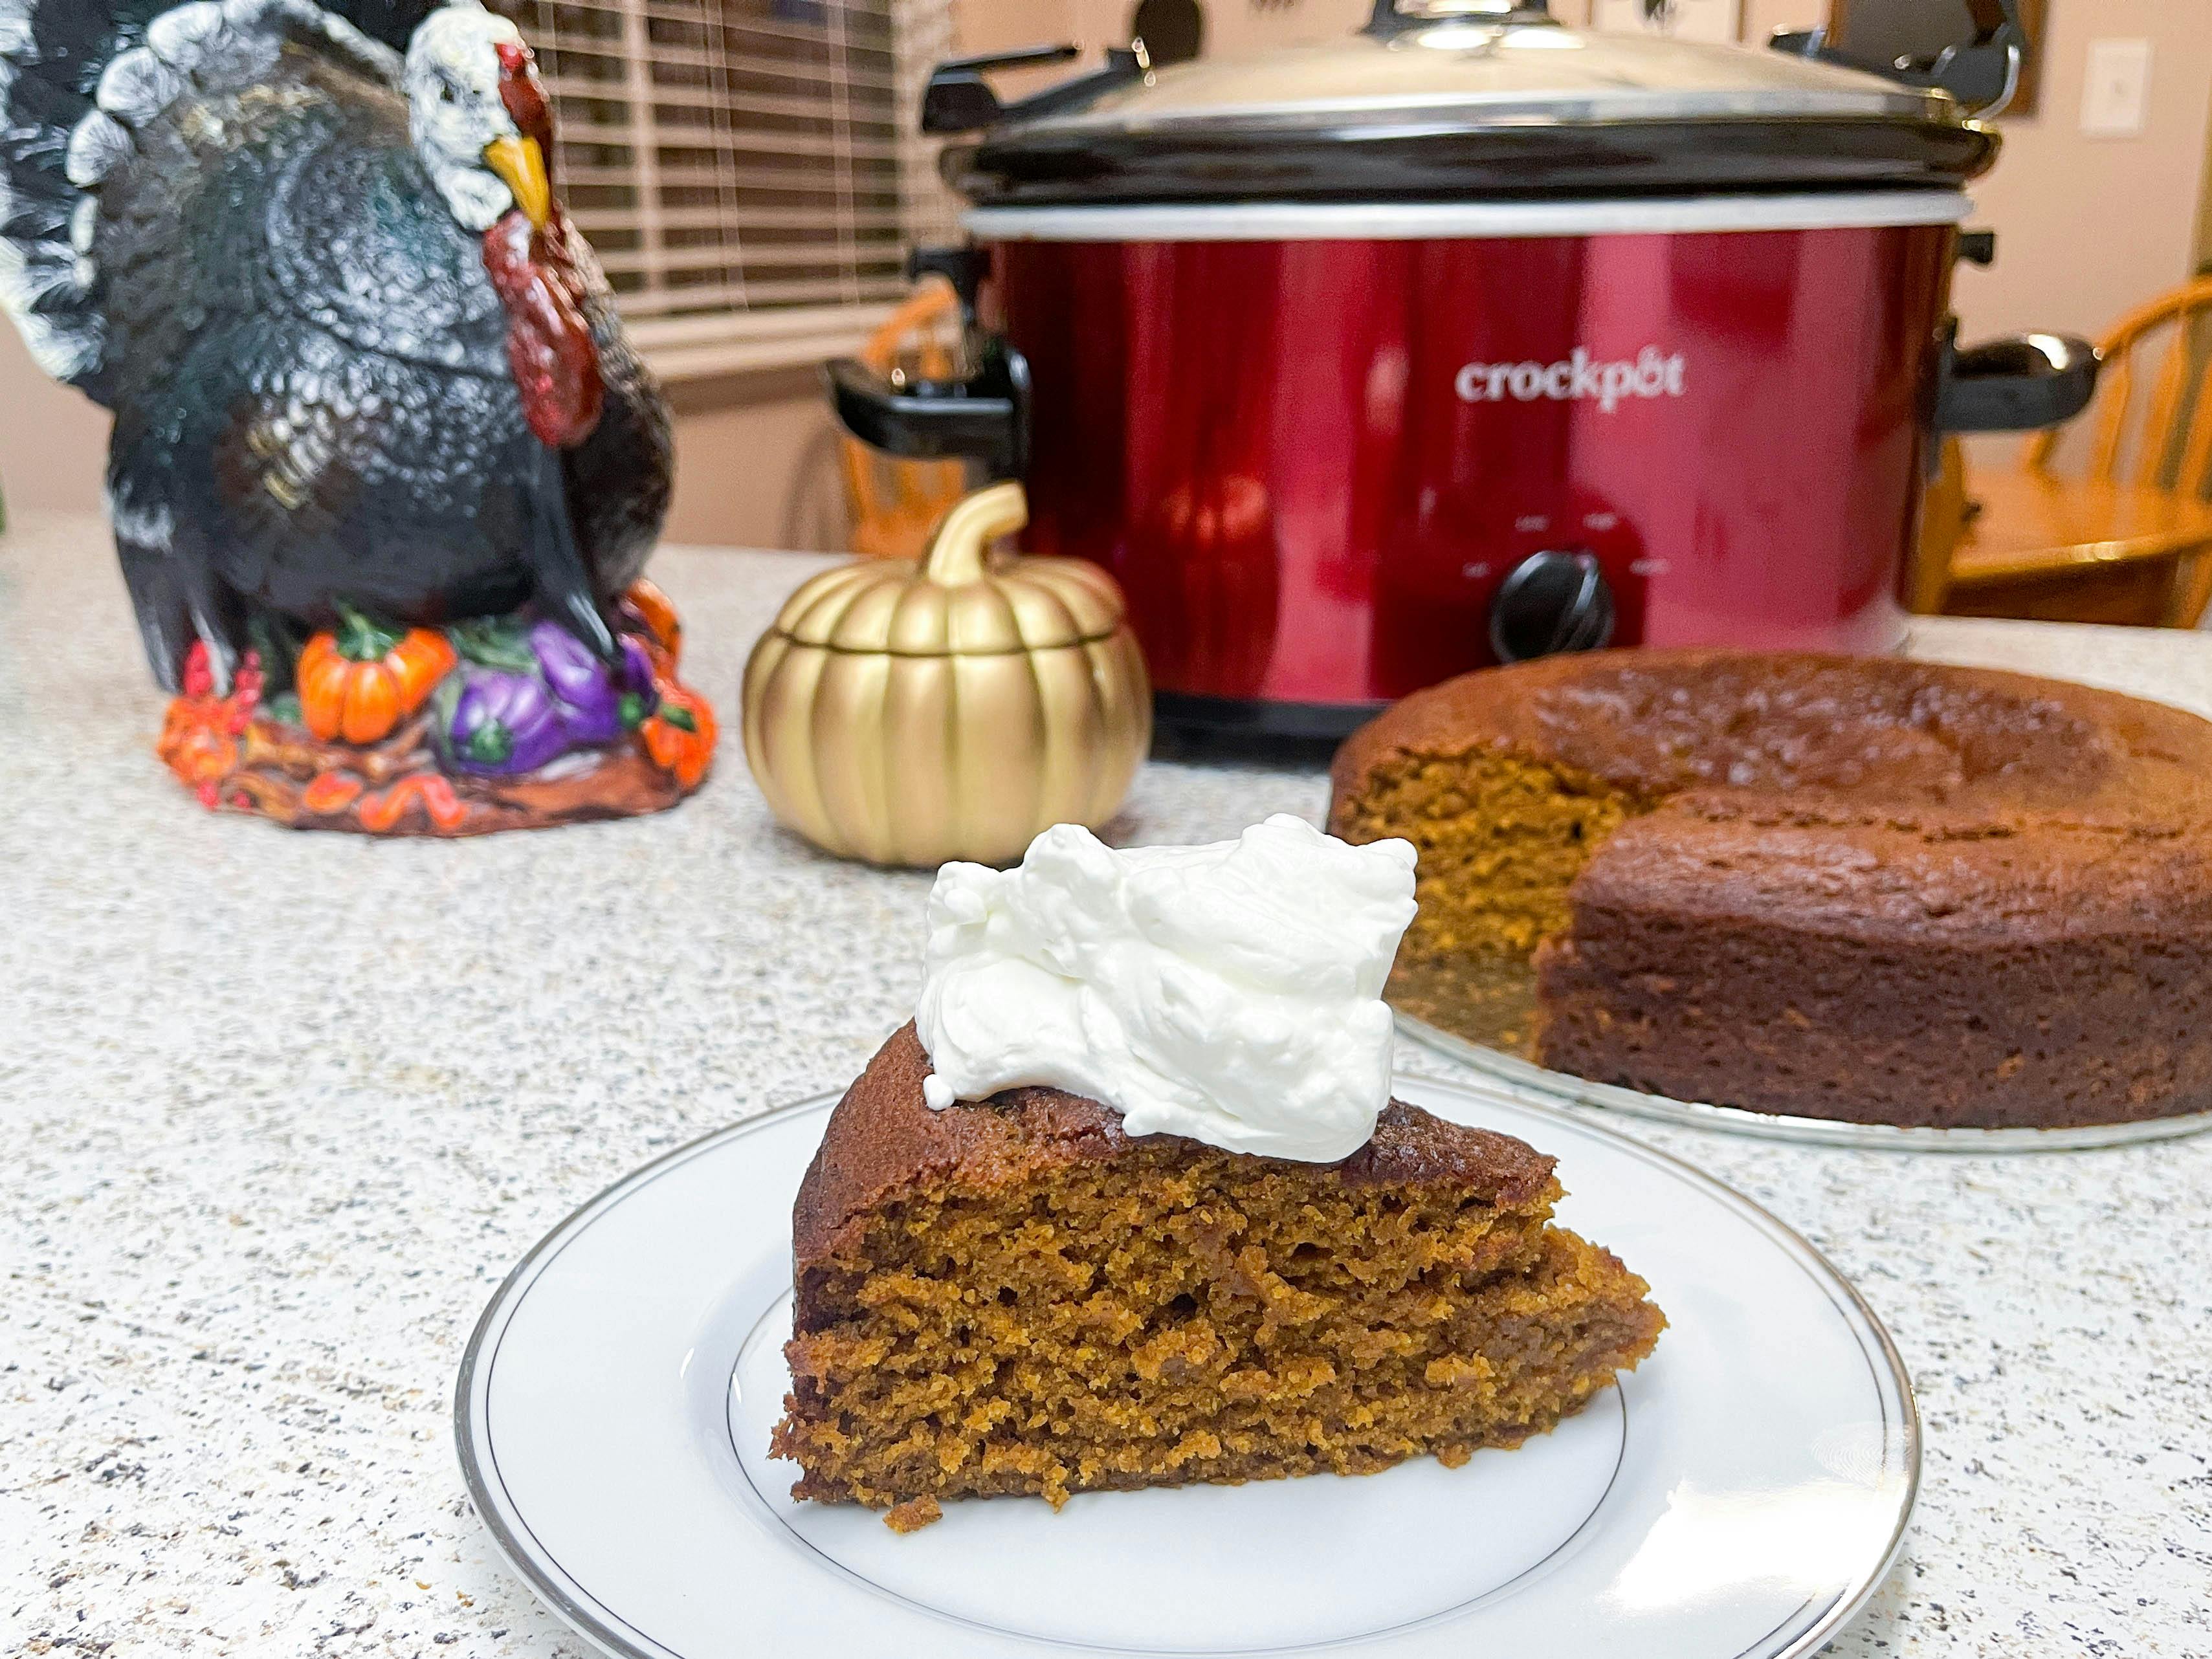 A slice of pumpkin cake on a plate in front of a crock pot